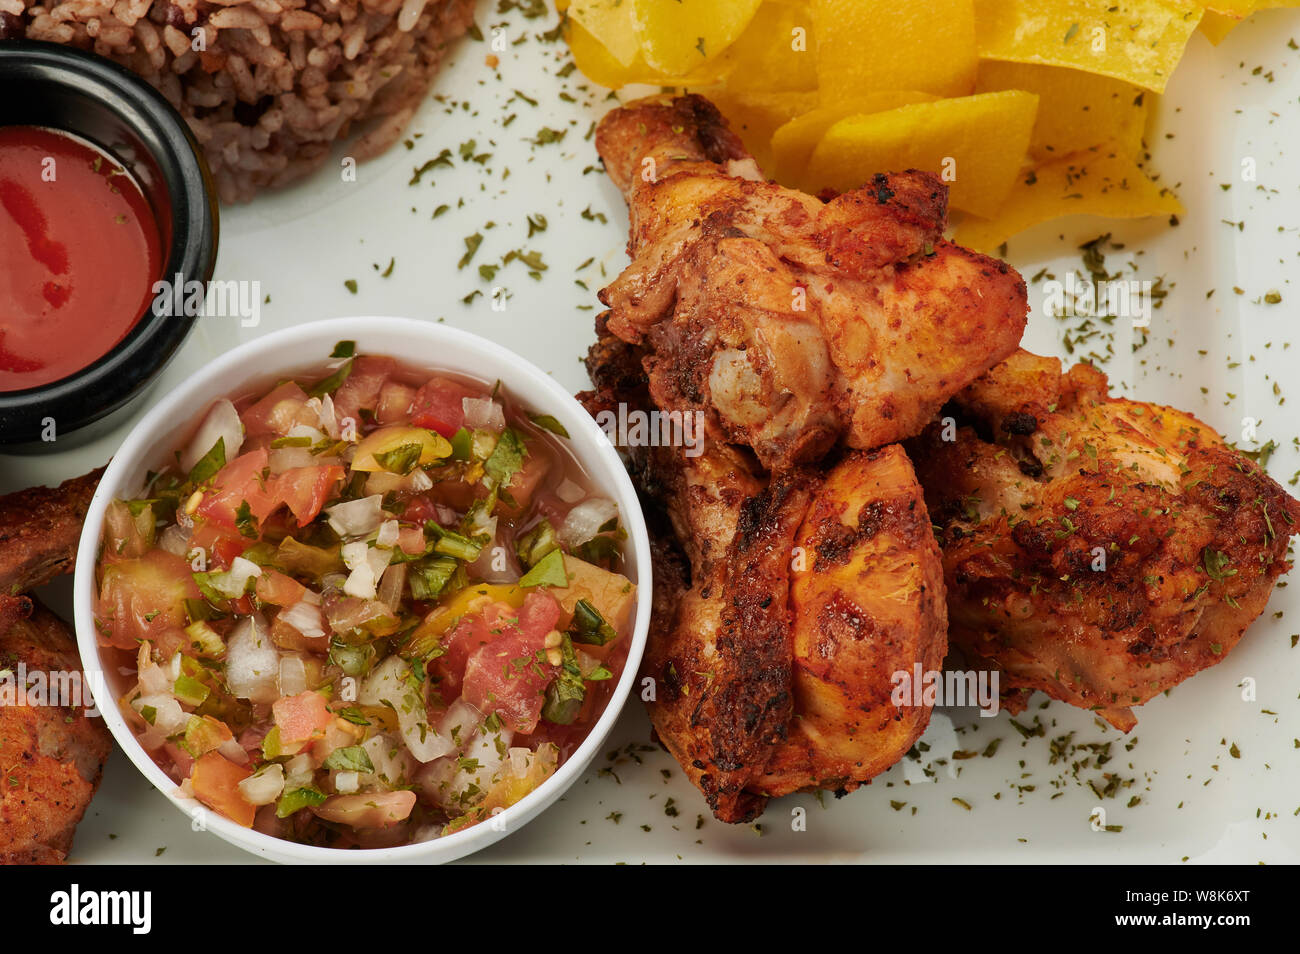 Fried chicken legs with salsa on plate close up view Stock Photo